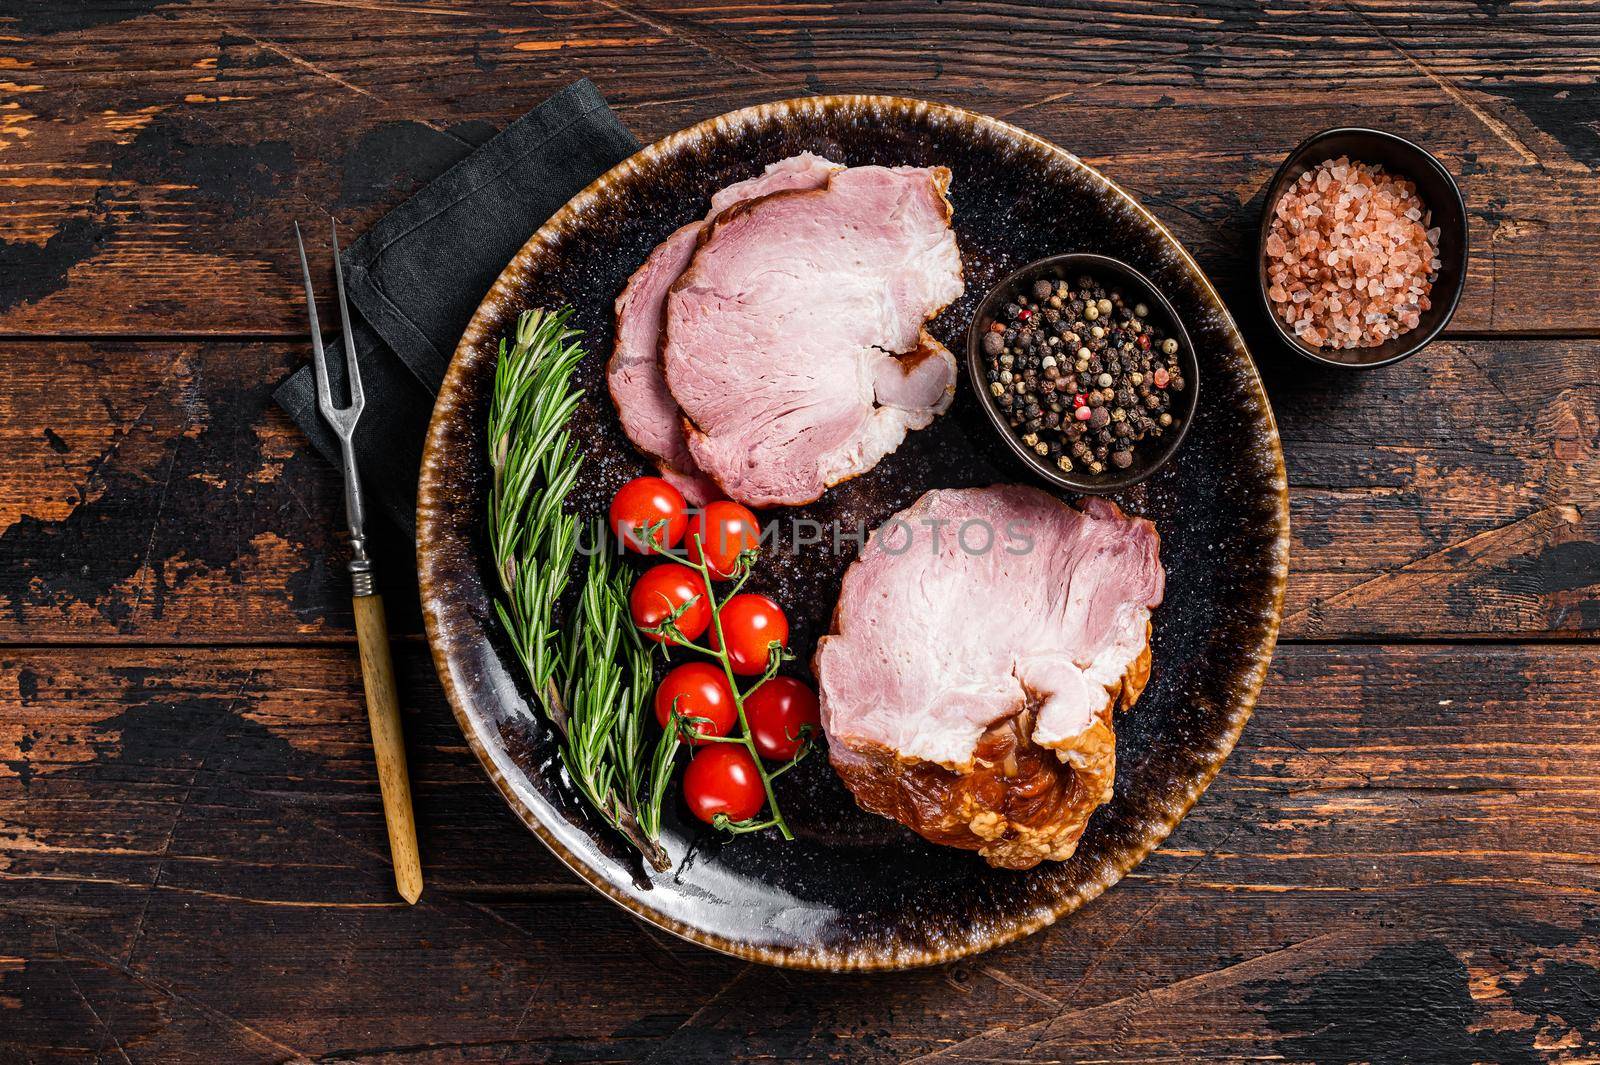 Smoked pork meat - gammon with herbs on rustic plate. Wooden background. Top view.